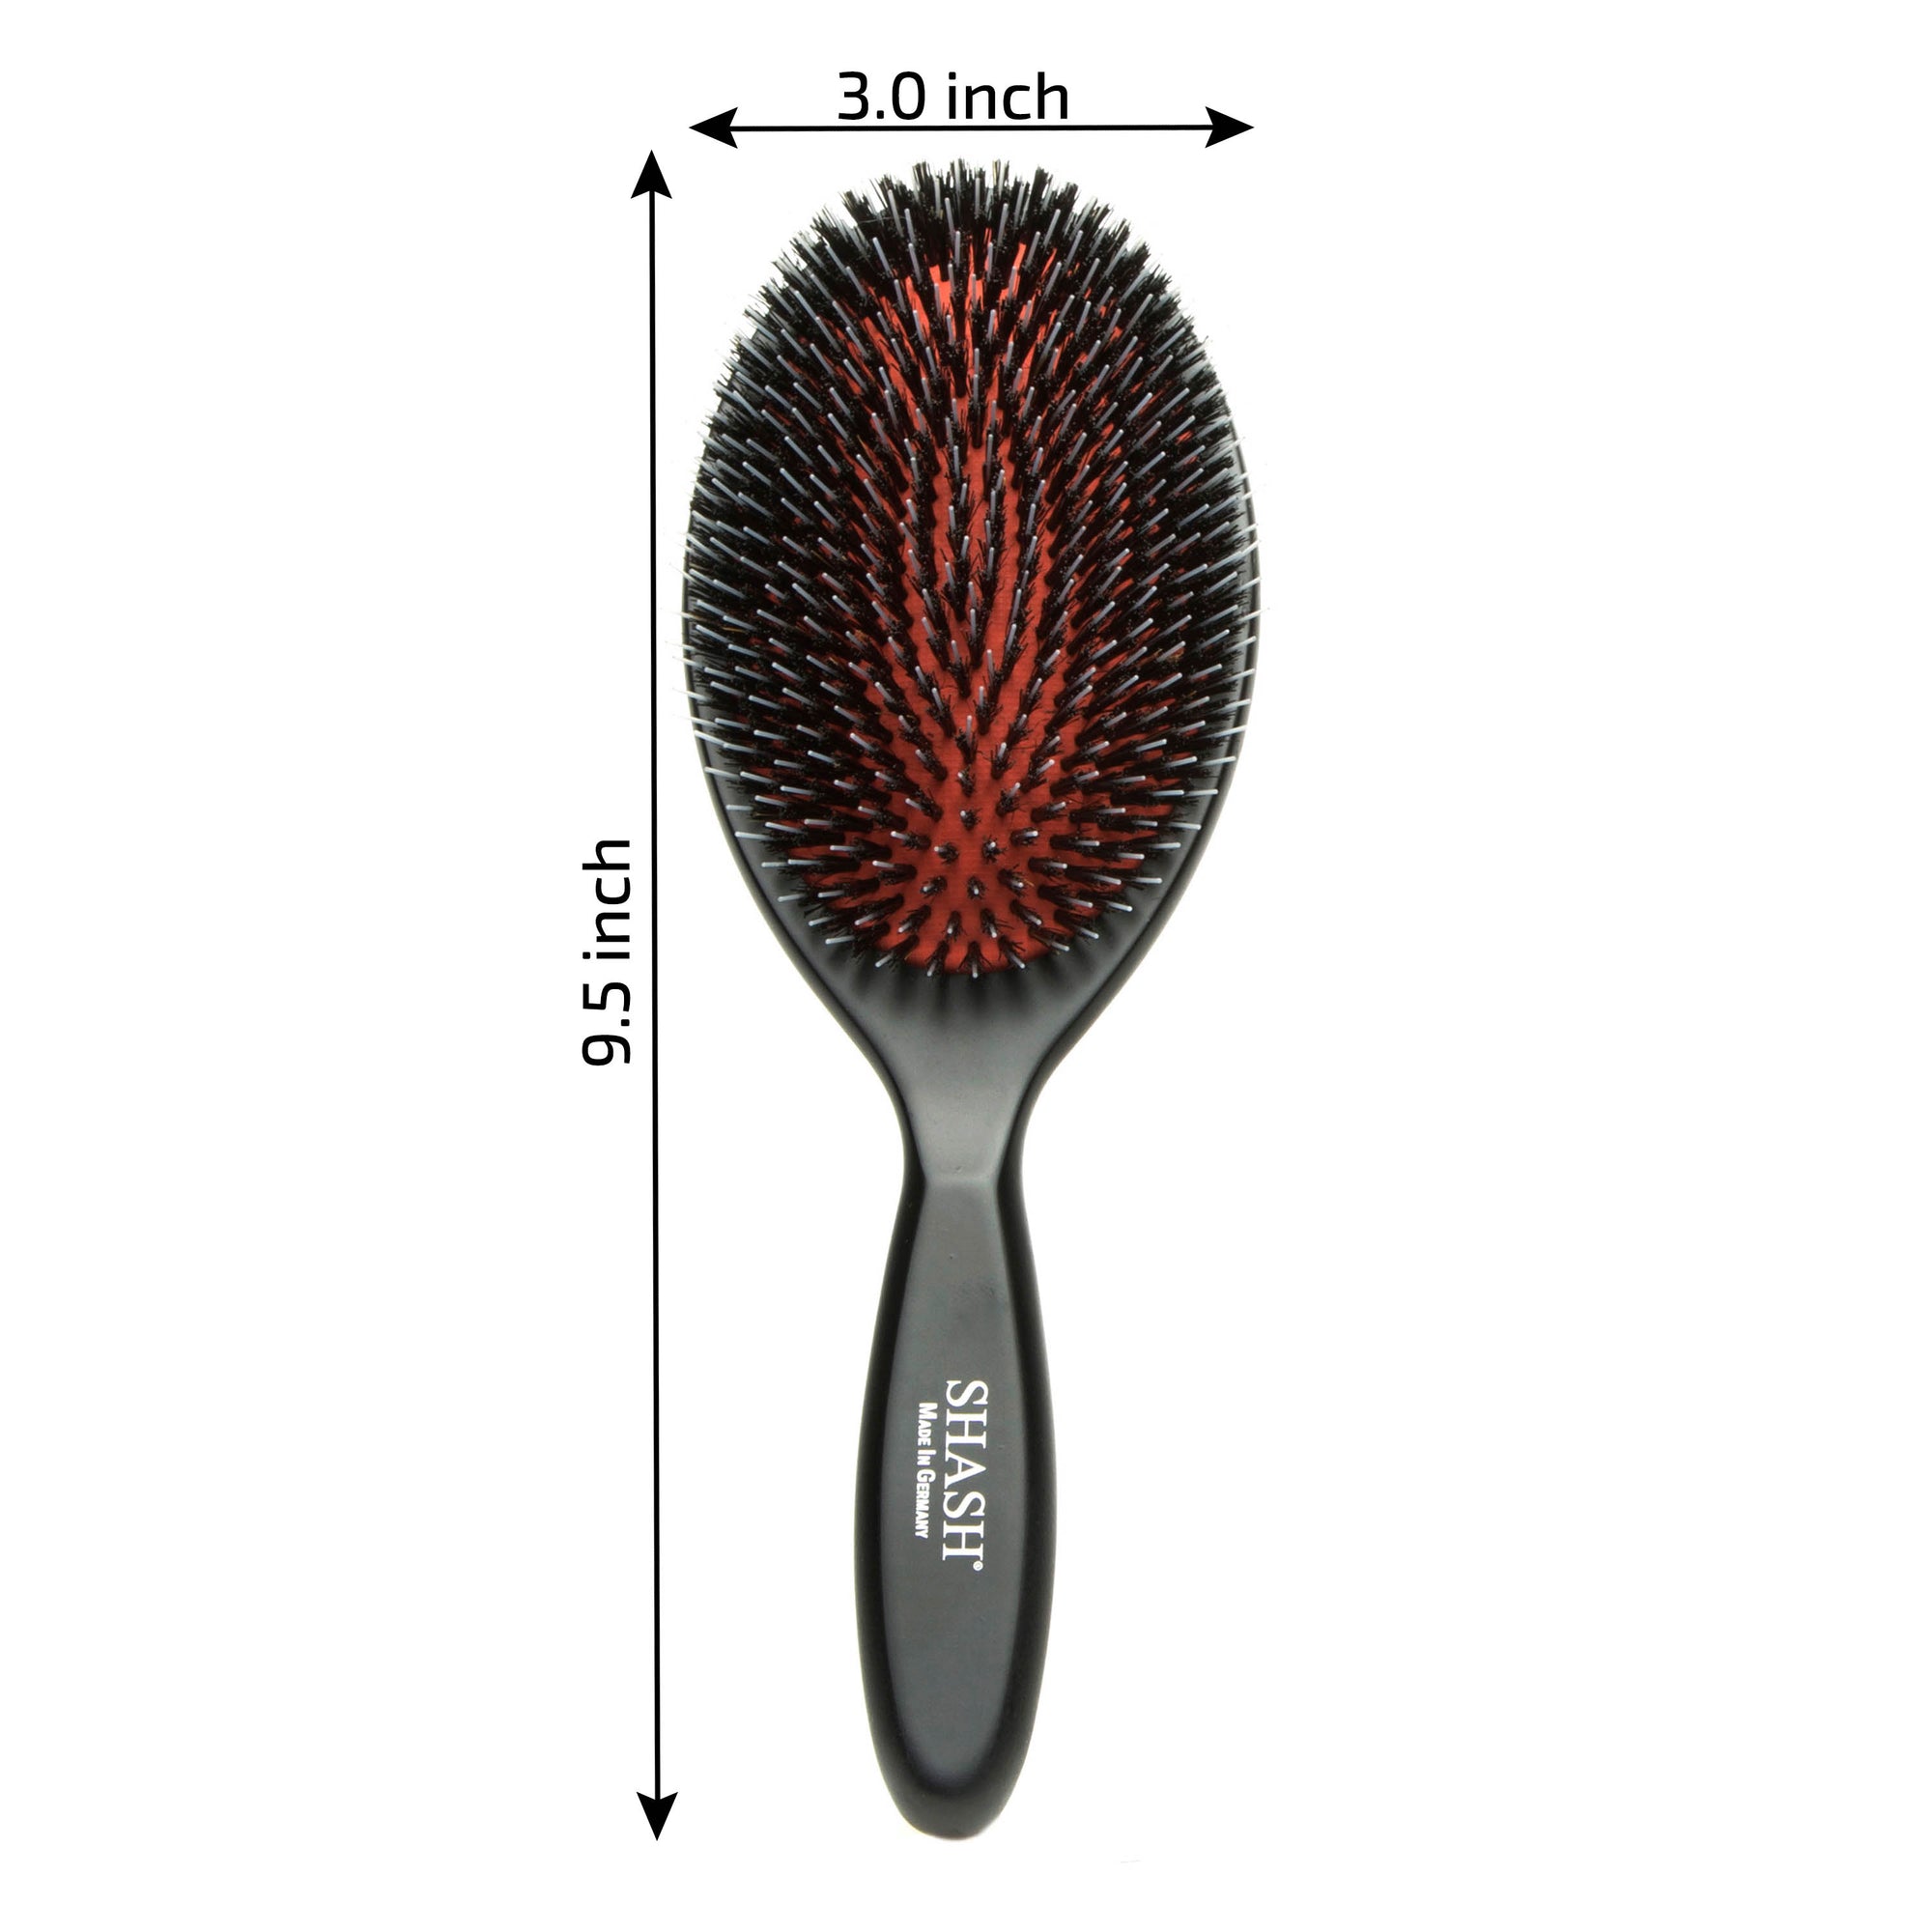 Made in Germany - Shash Nylon Boar Bristle Brush Suitable for Normal to Thick Hair - Gently Detangles, No Pulling or Split Ends - Softens and Improves